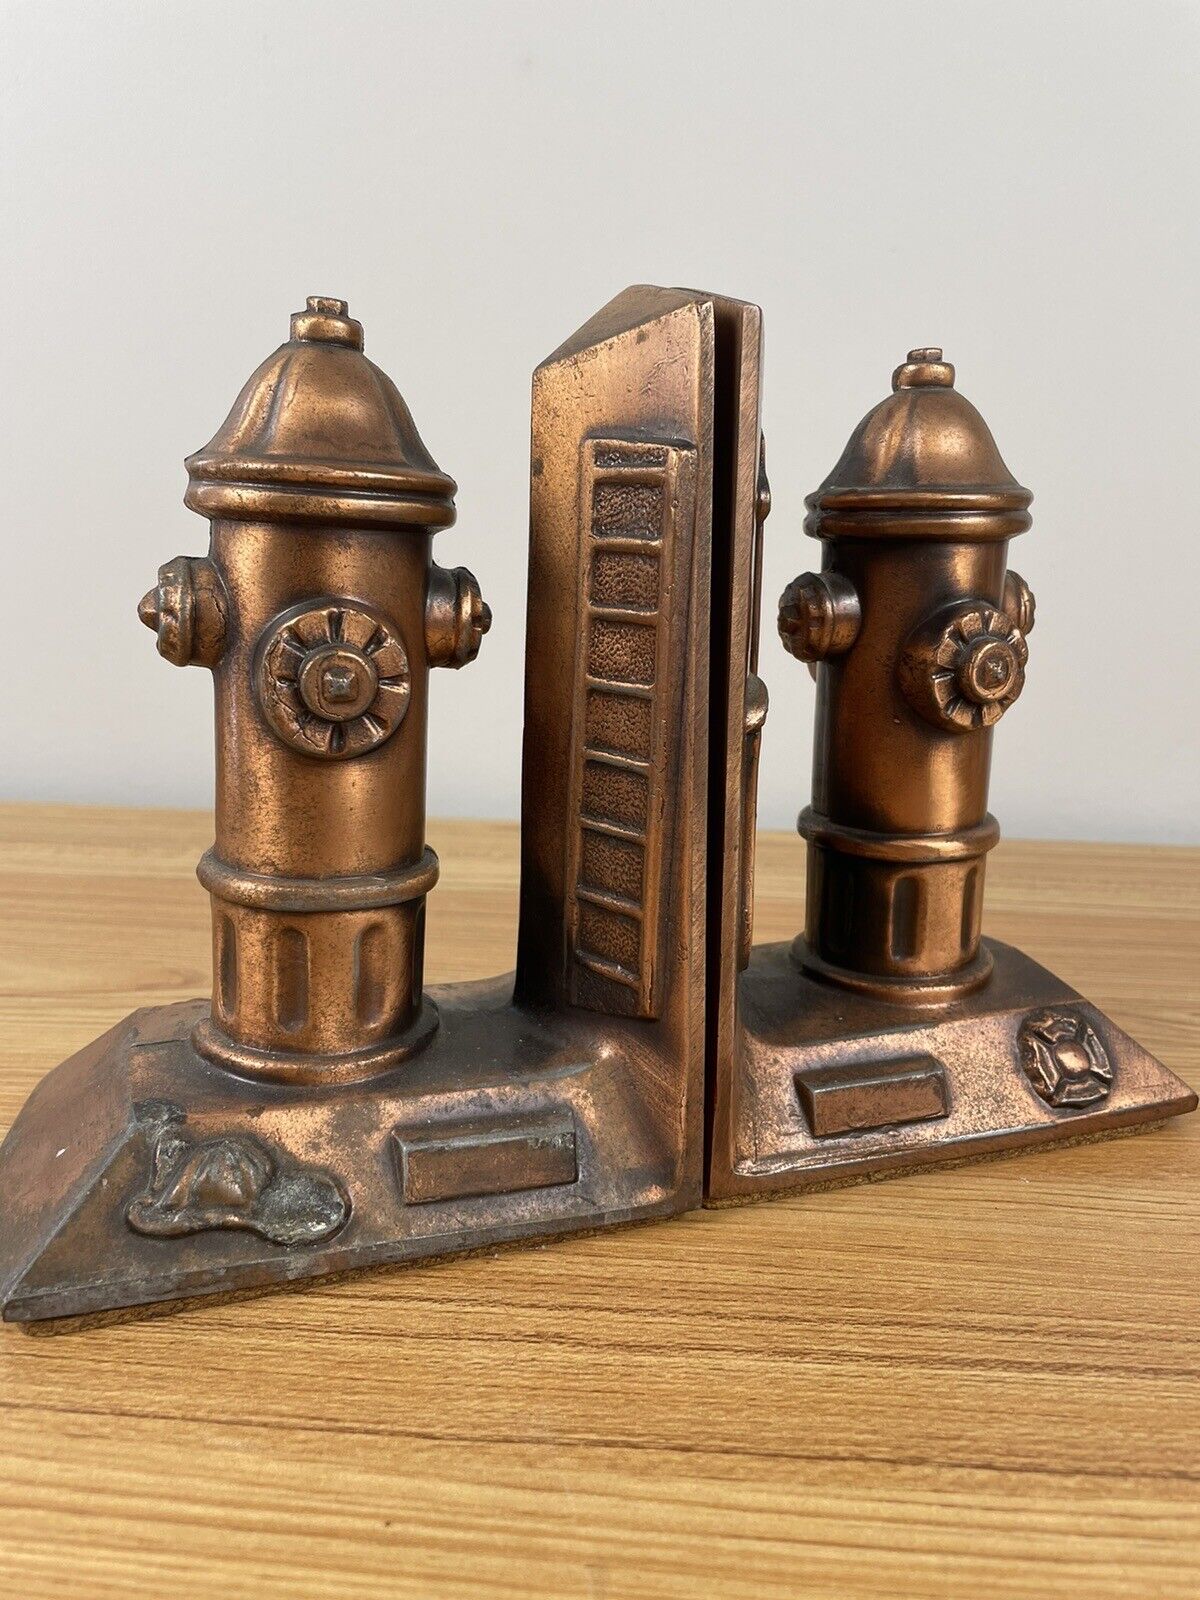 Pair Fire Hydrant Fireman Metal Bookends Copper Finish 7-1/4 inch Tall 3LB each